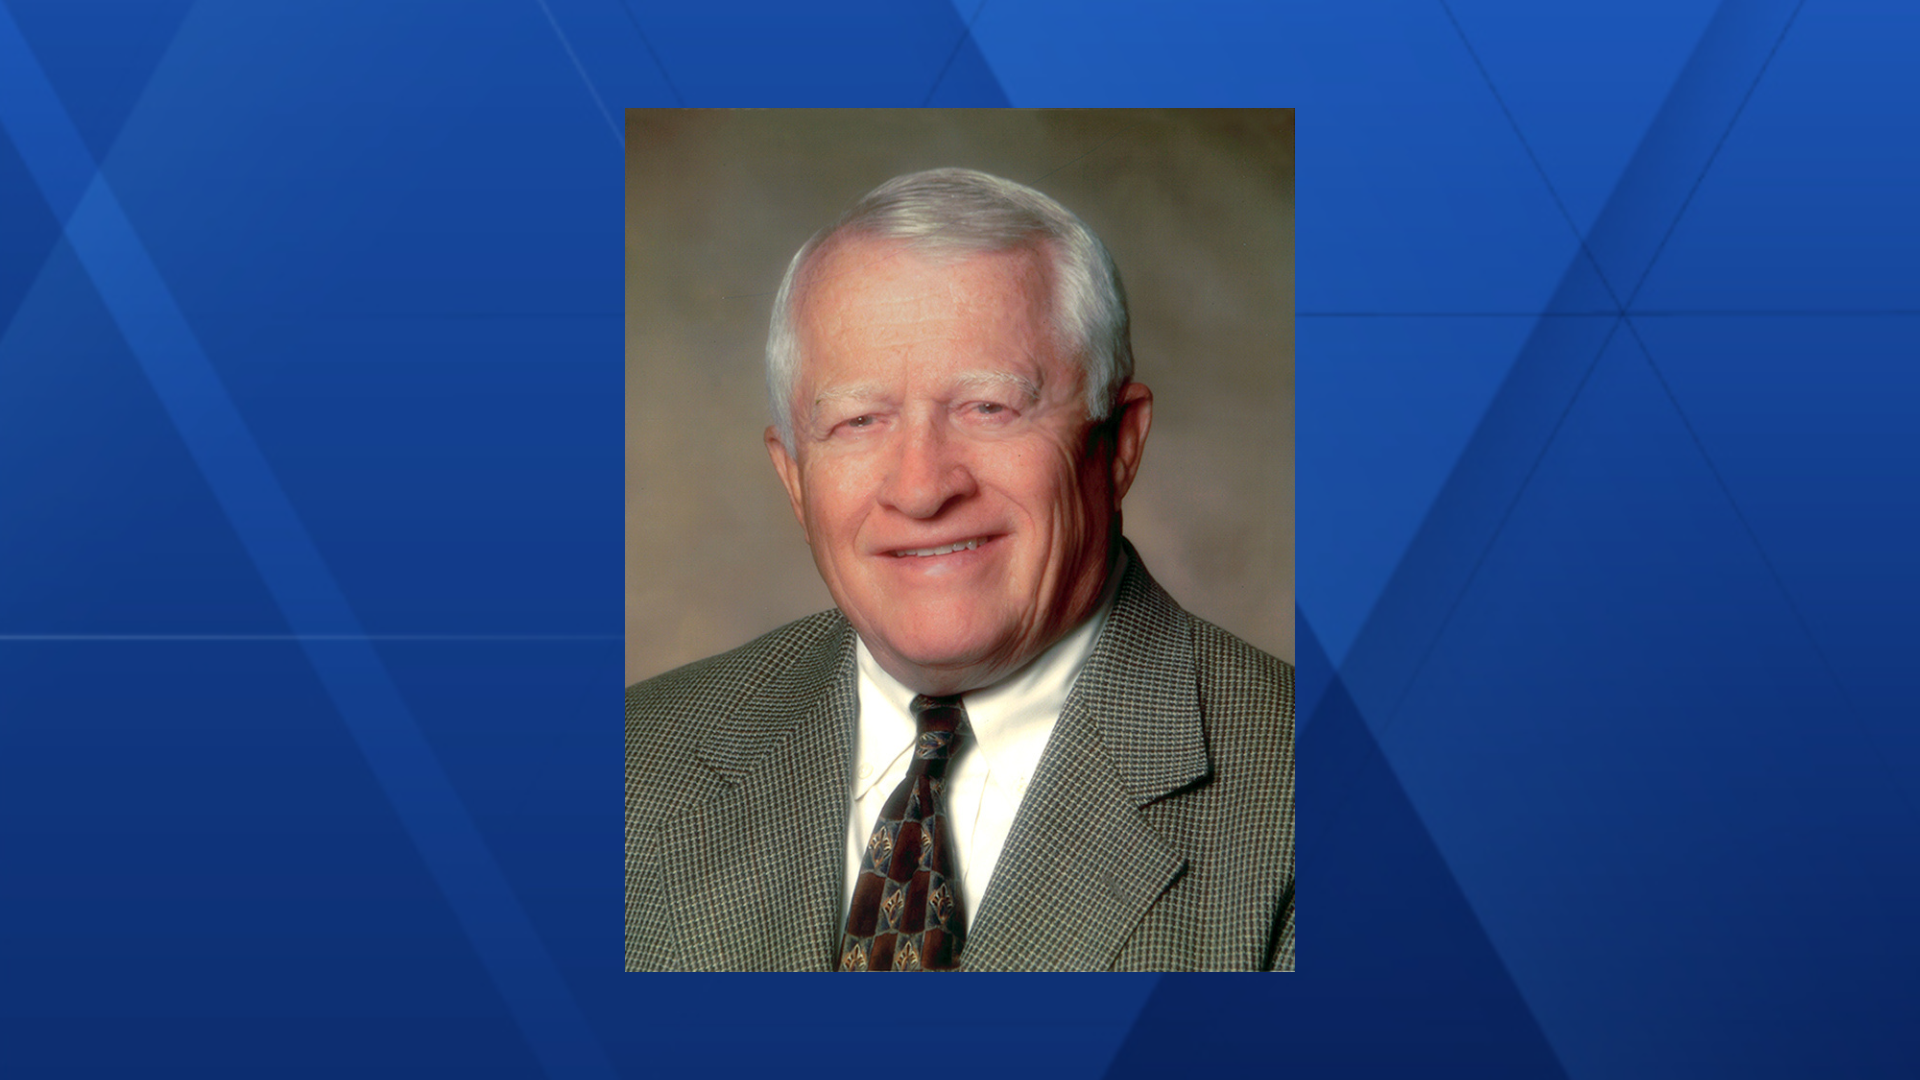 kcci.com - Chad Thompson - Stew Hansen, a well-known leader in Iowa's auto industry, has died